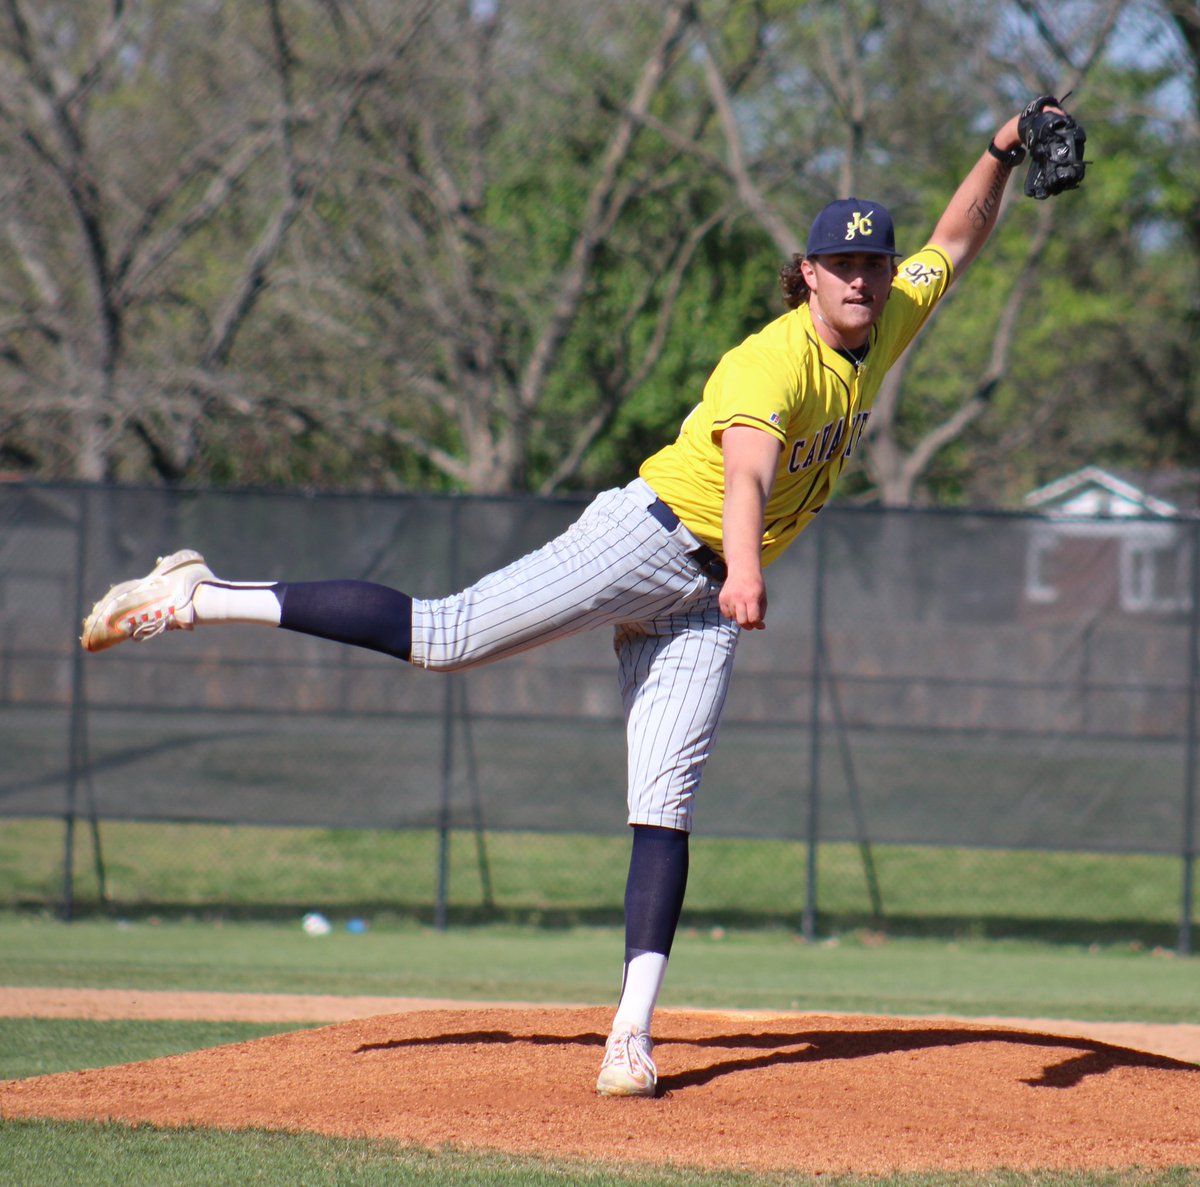 Big B @b_stone3204 and the @JCCCBaseball team moved to 38-8 for the season! Bran went 6 IP, 2 R, 0 ER, 11 K, and 1 BB, and helped B move to 10-0 on the season.  Two more games with Labette this weekend!!   #proudmama